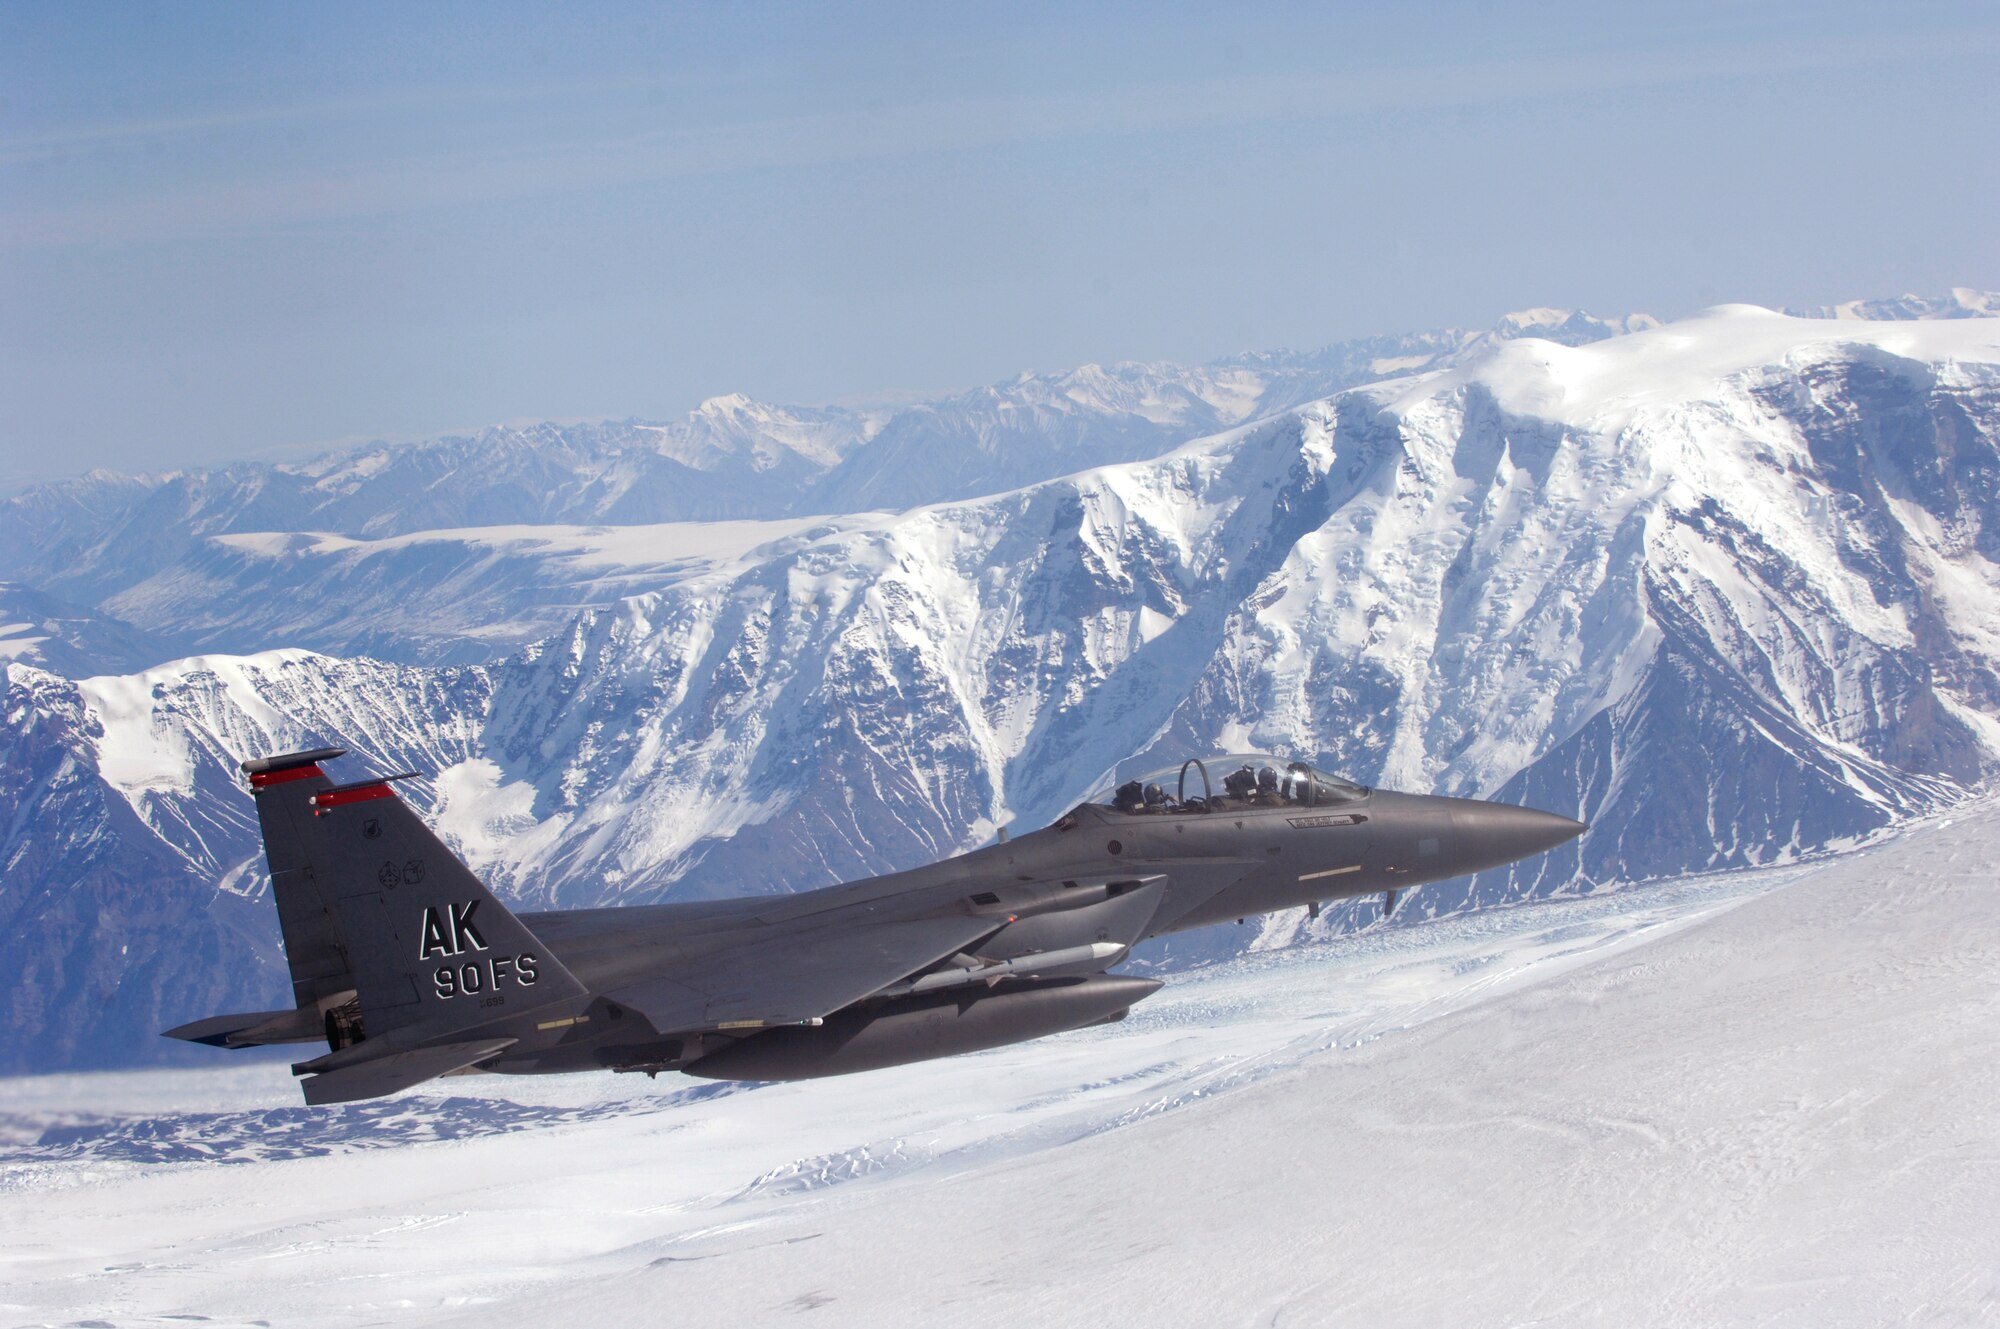 OVER ALASKA -- An F-15E Strike Eagle flys along the Wrangell/St.Elias Mountain Range during a training mission. The Strike Eagle is assigned to the 90th Fighter Squadron at Elmendorf AFB, Alaska, which traces its history back to August 1917. Another chapter in that rich history is about to be written as the F-15E at Elmendorf will soon be replace by the F-22A Raptor. (U.S. Air Force photo by Tech. Sgt. Keith Brown)